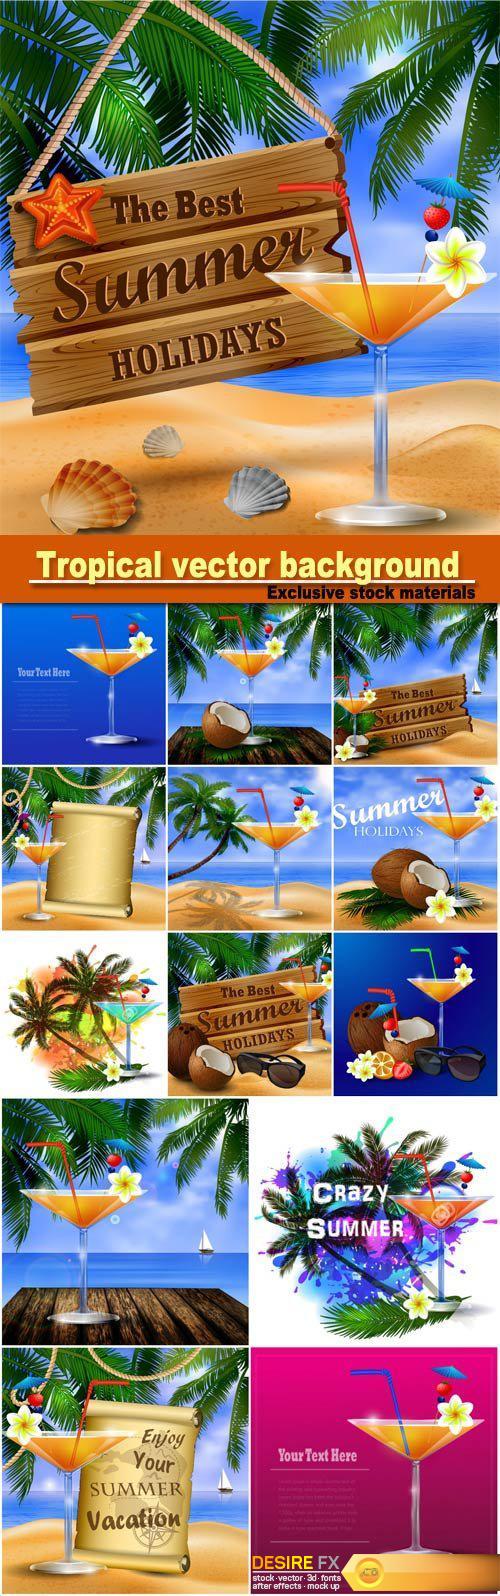 Tropical vector background with leaves of palm trees